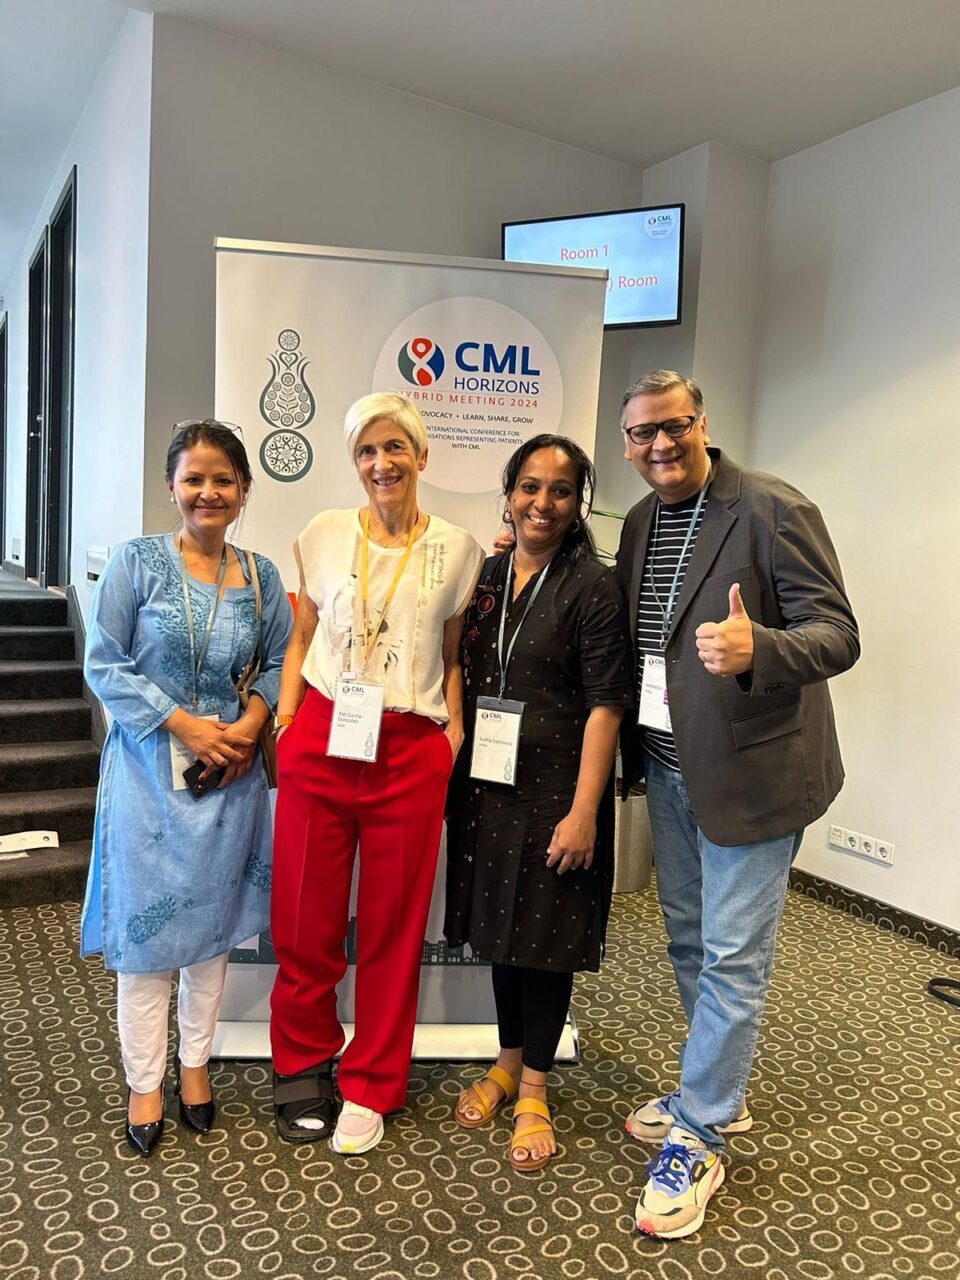 CML Horizons was an impressive gathering of global leaders exploring the latest in Chronic Myeloid Leukemia advocacy and care! – The Max Foundation